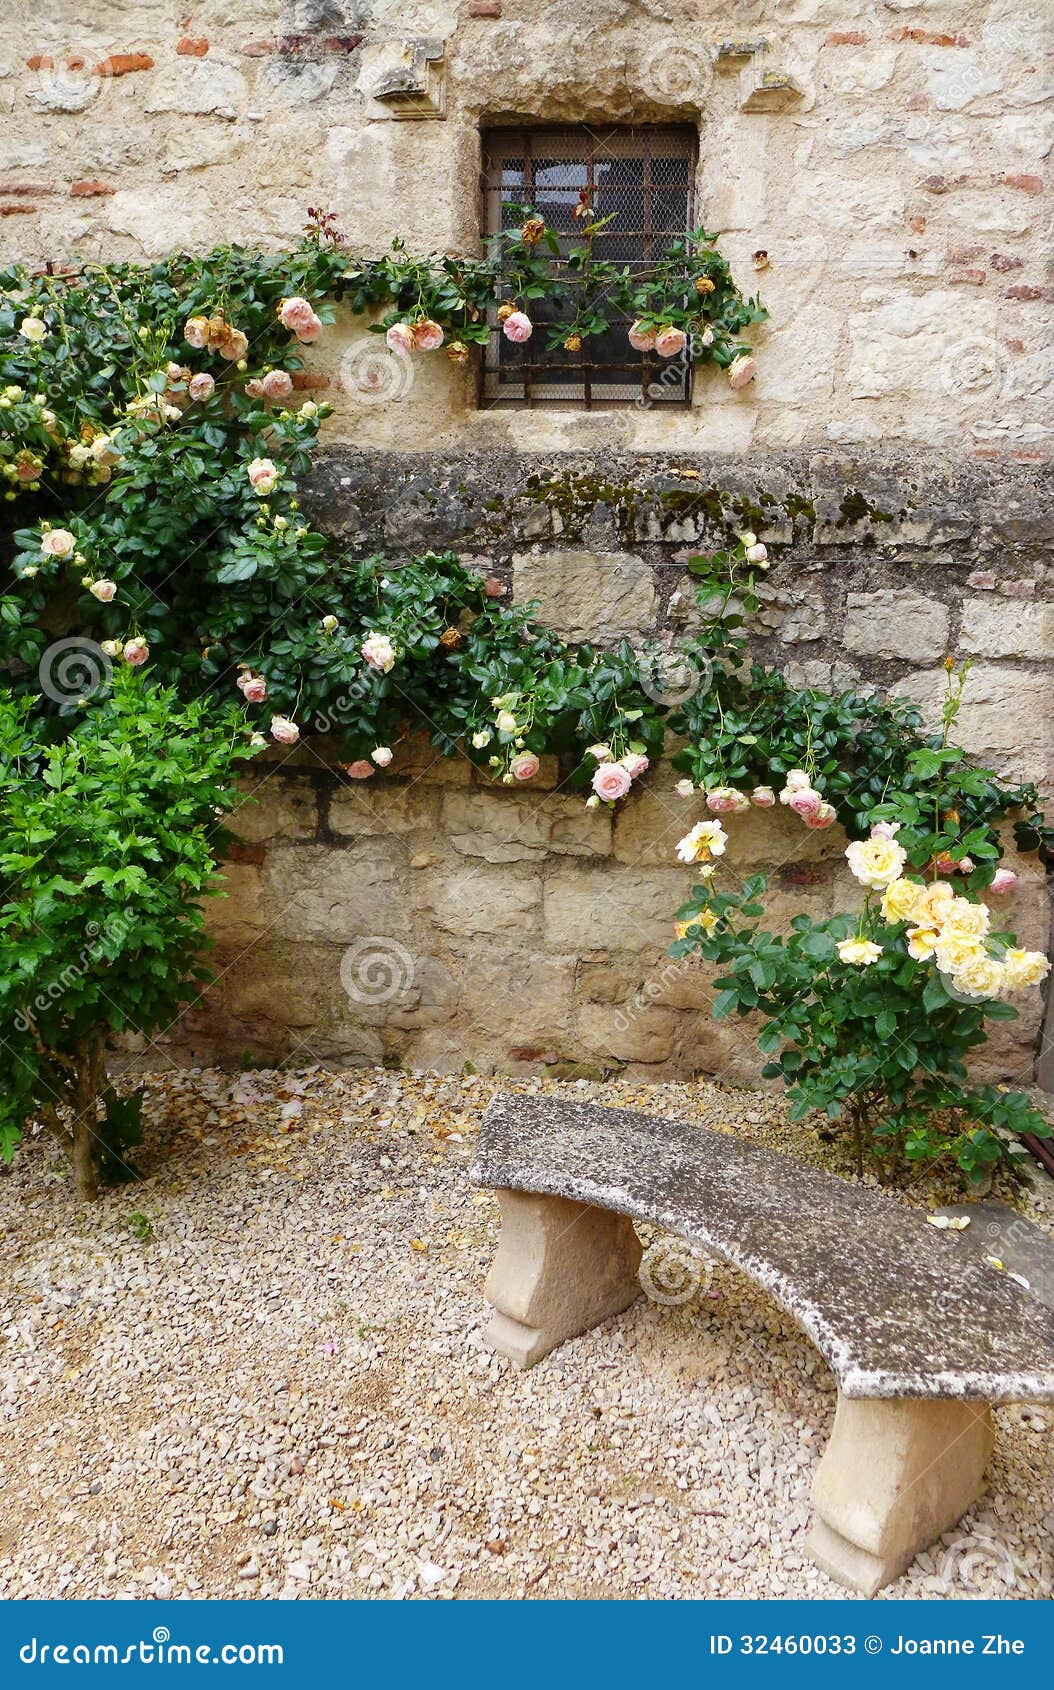 Chateau garden stone bench stock image. Image of french - 32460033